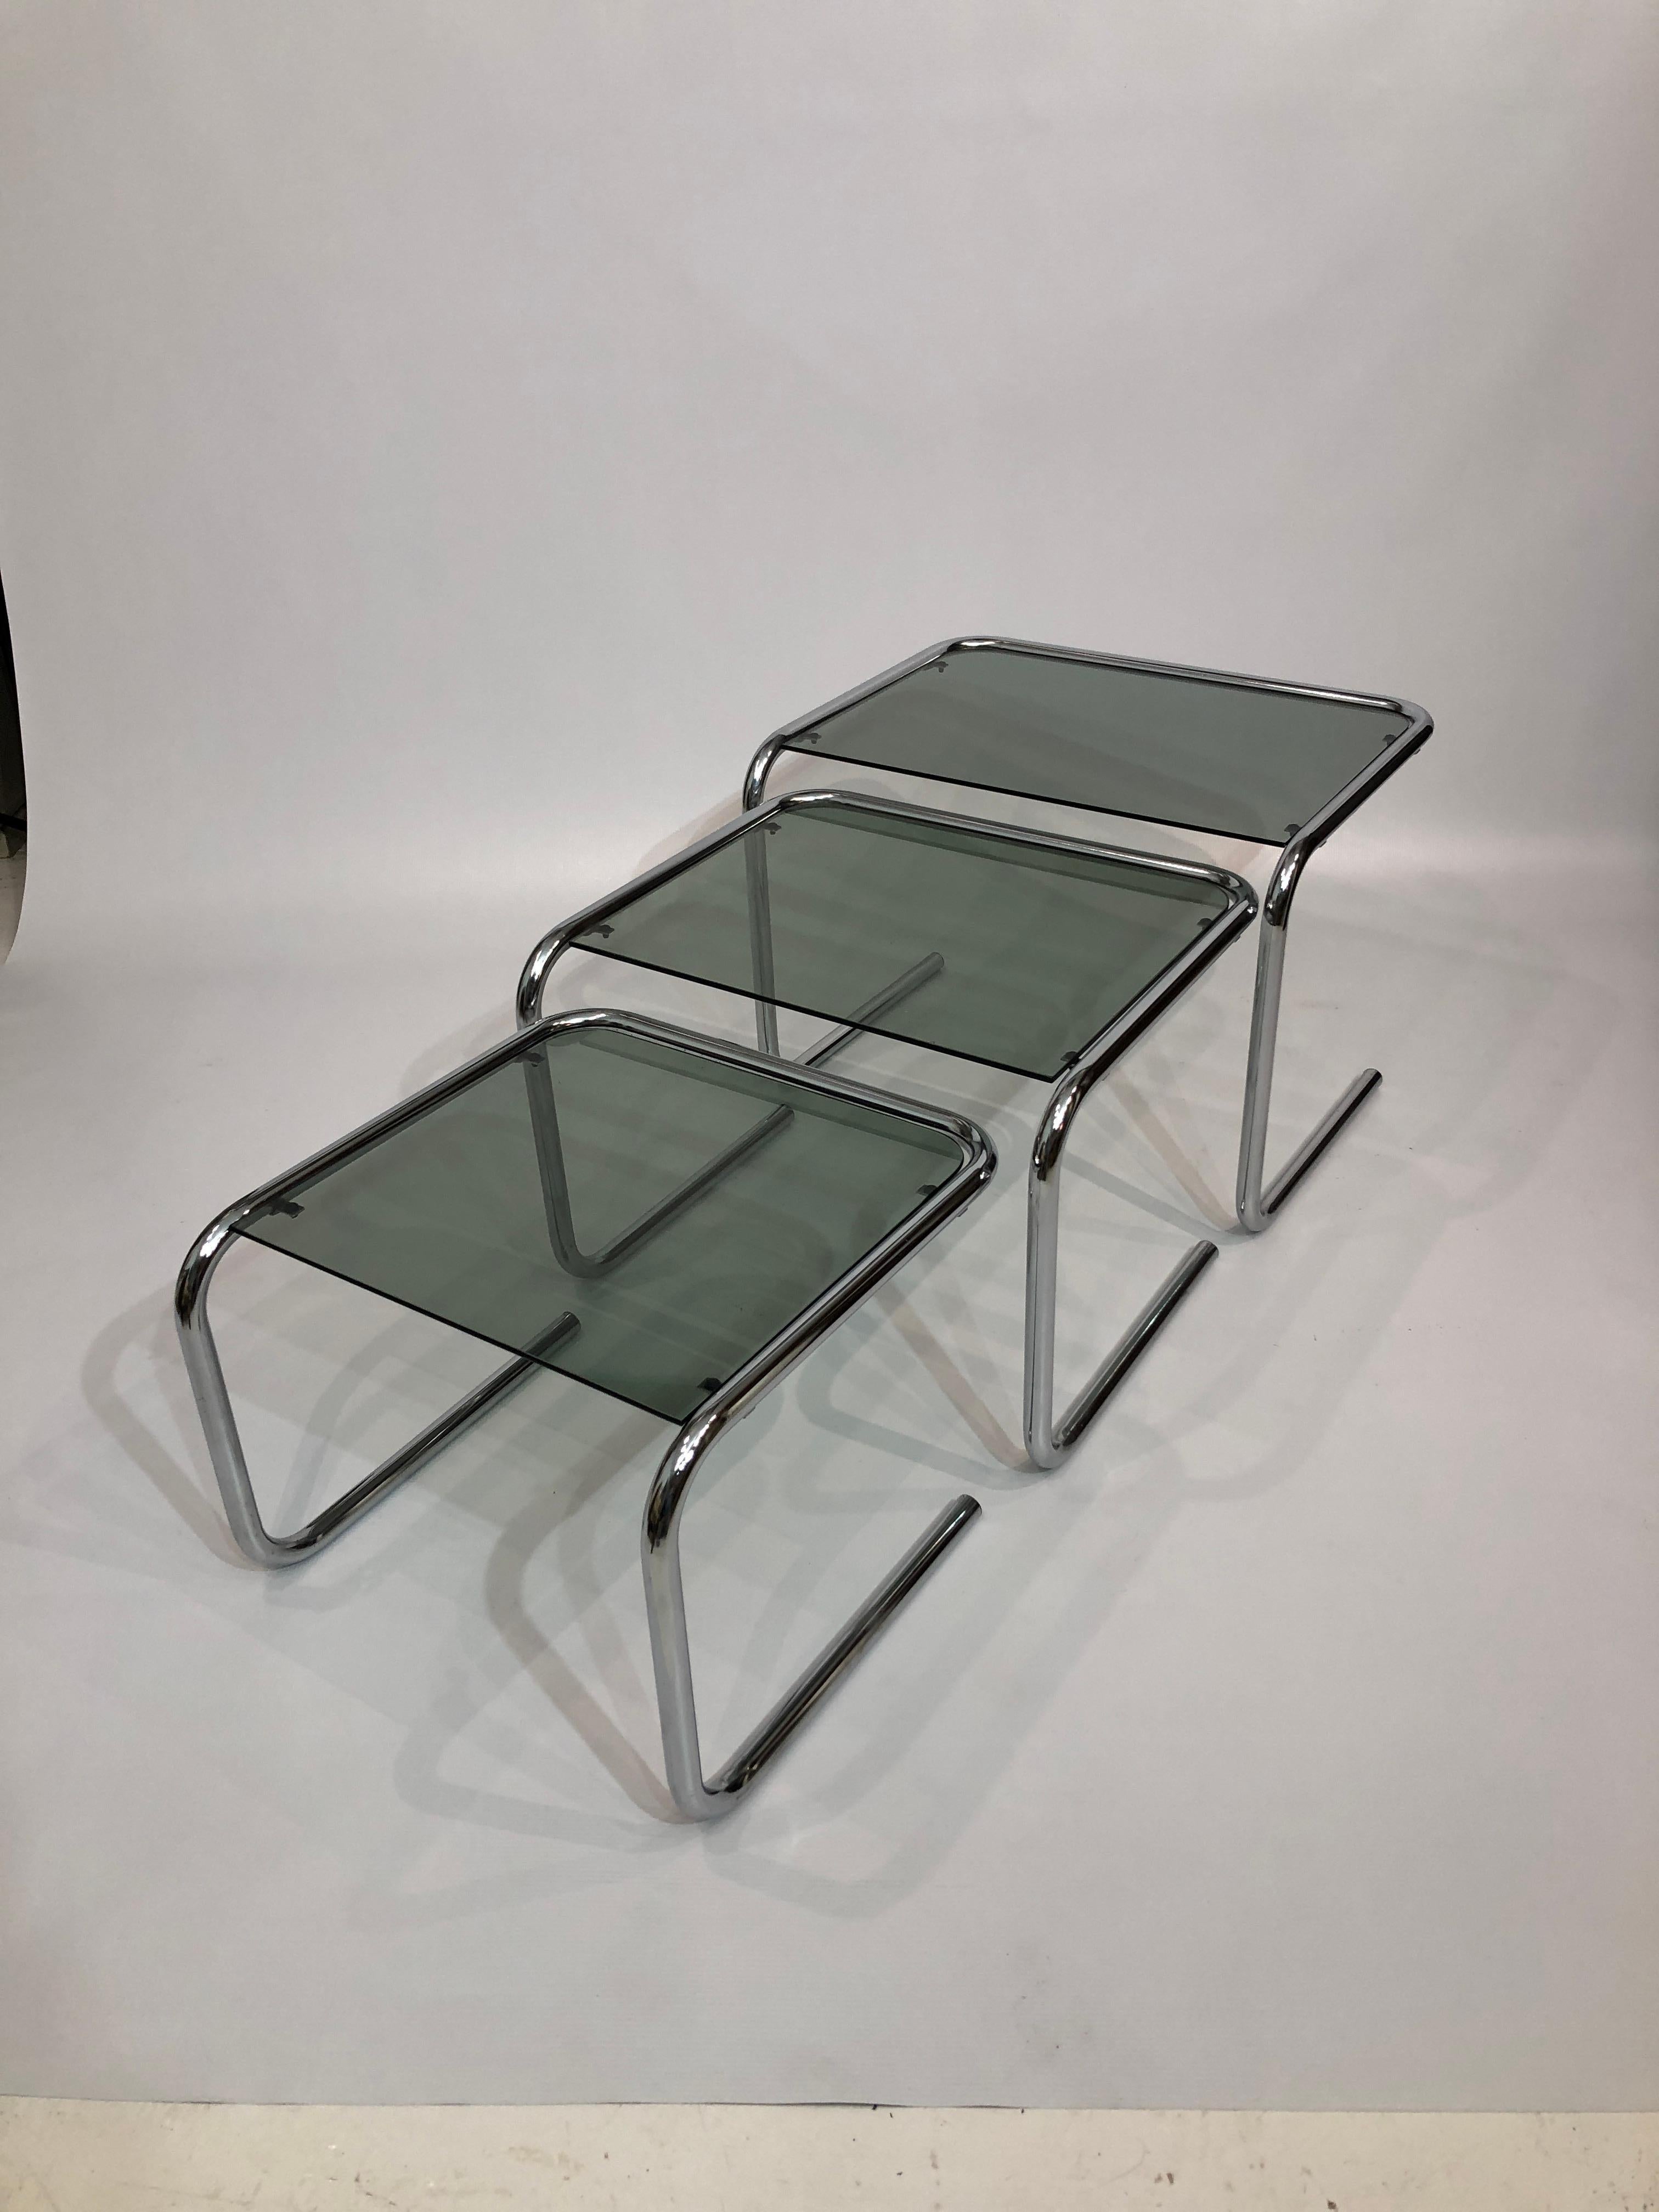 Late 20th Century Postmodern Nesting Side Tables 1970s Chrome Cantilever Pieff Style Smoked Glass